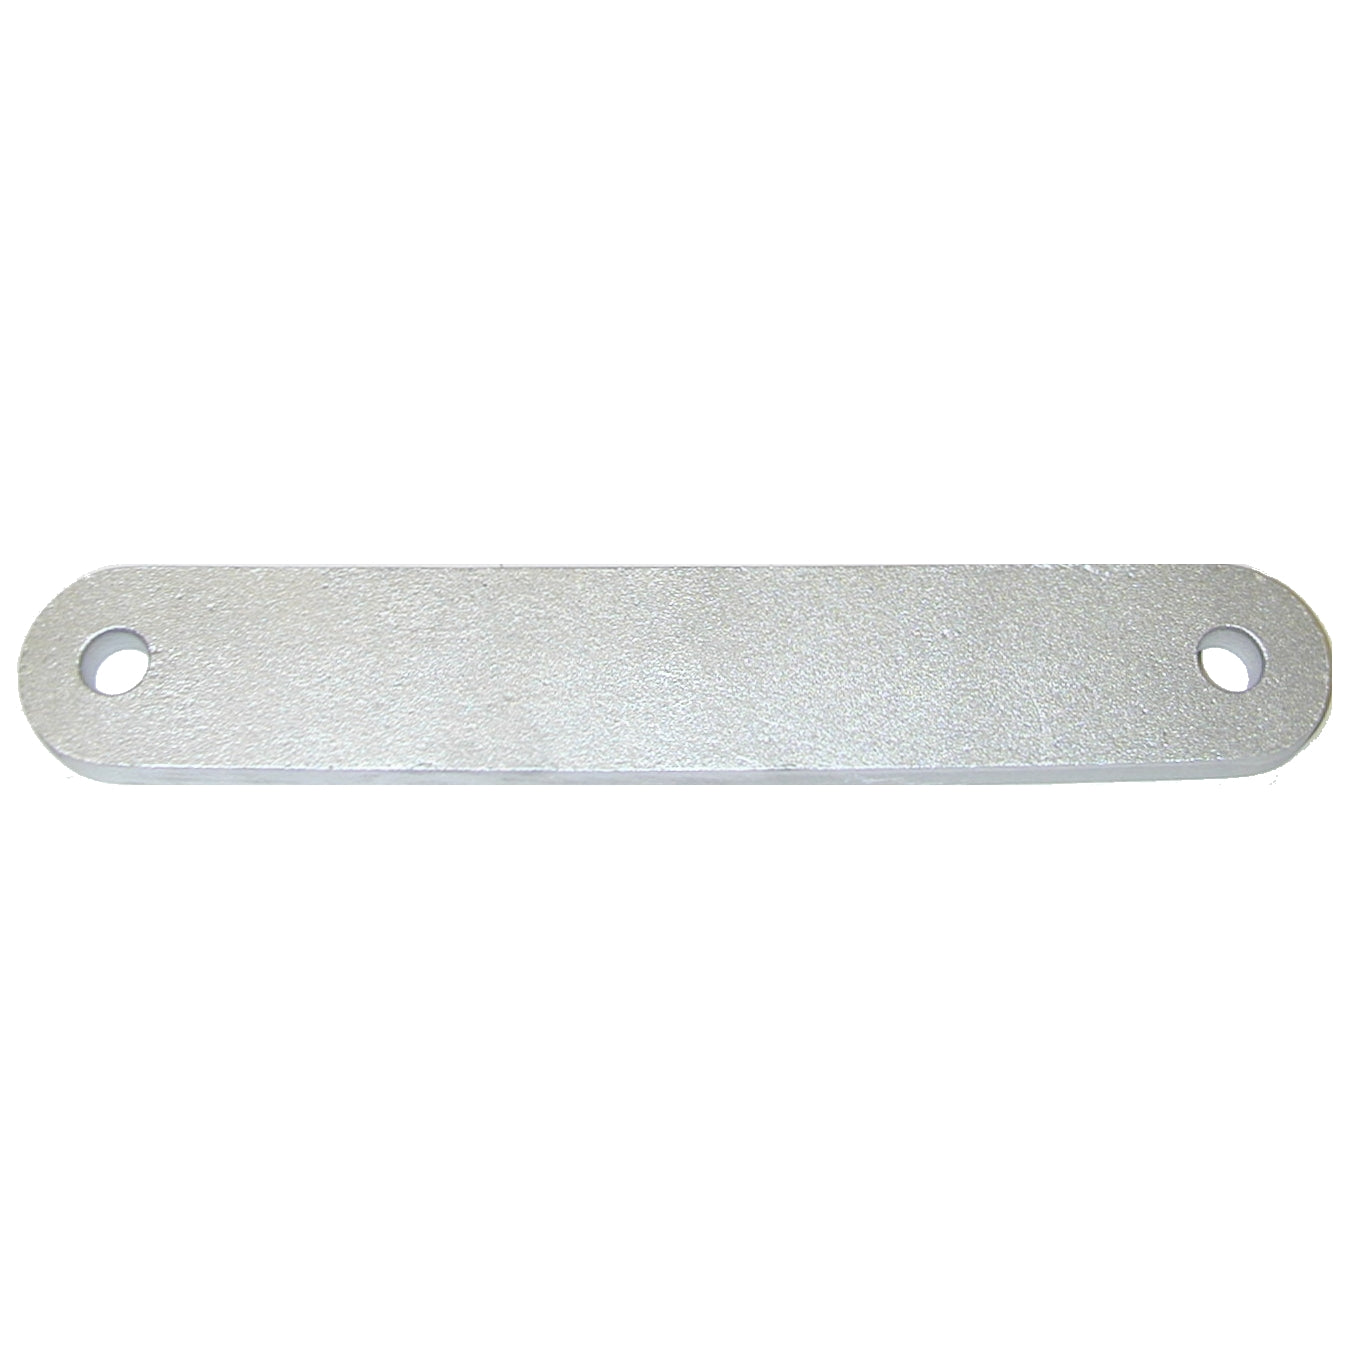 T-H Marine Transom Support Plate Lower Mount [TSP-2-DP]